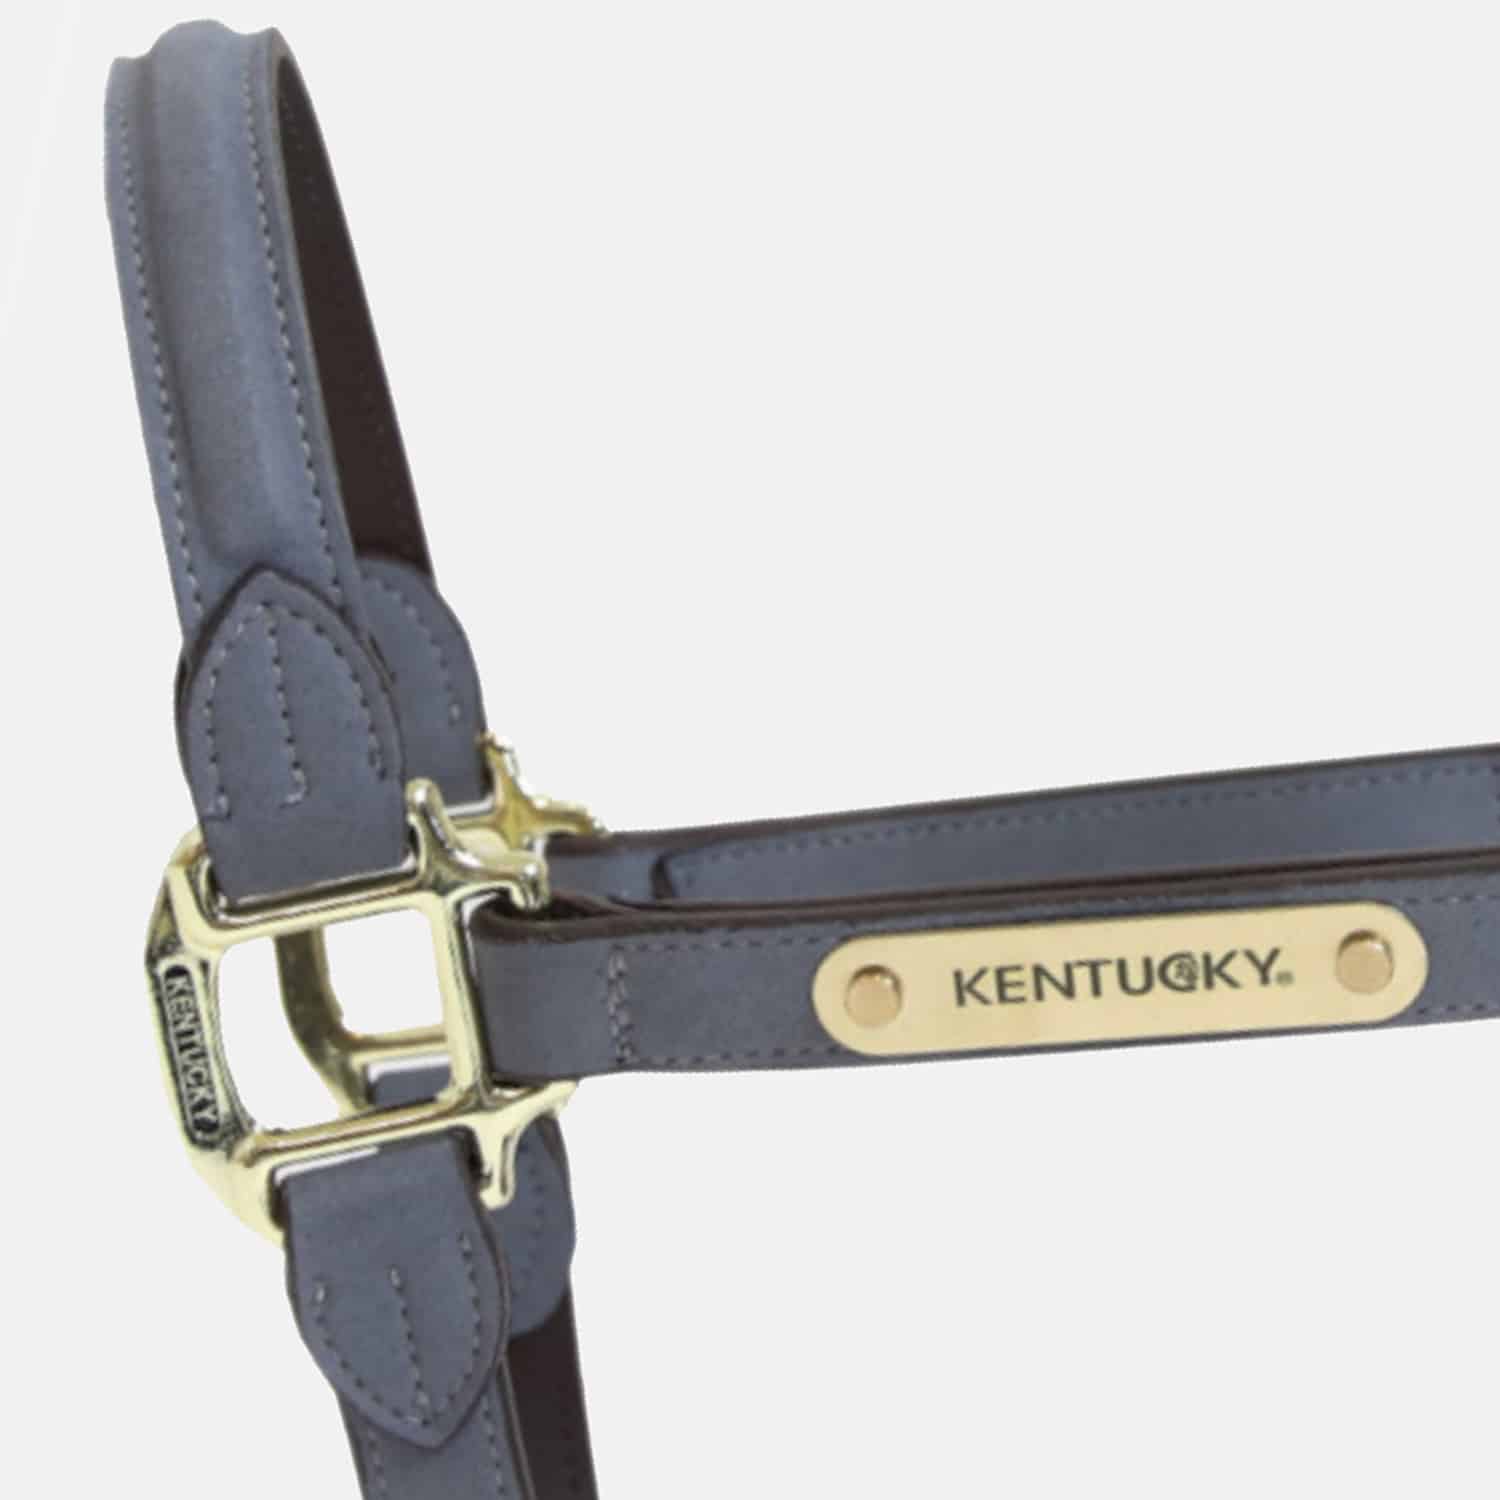 Kentucky Horsewear - Licol cheval anatomique